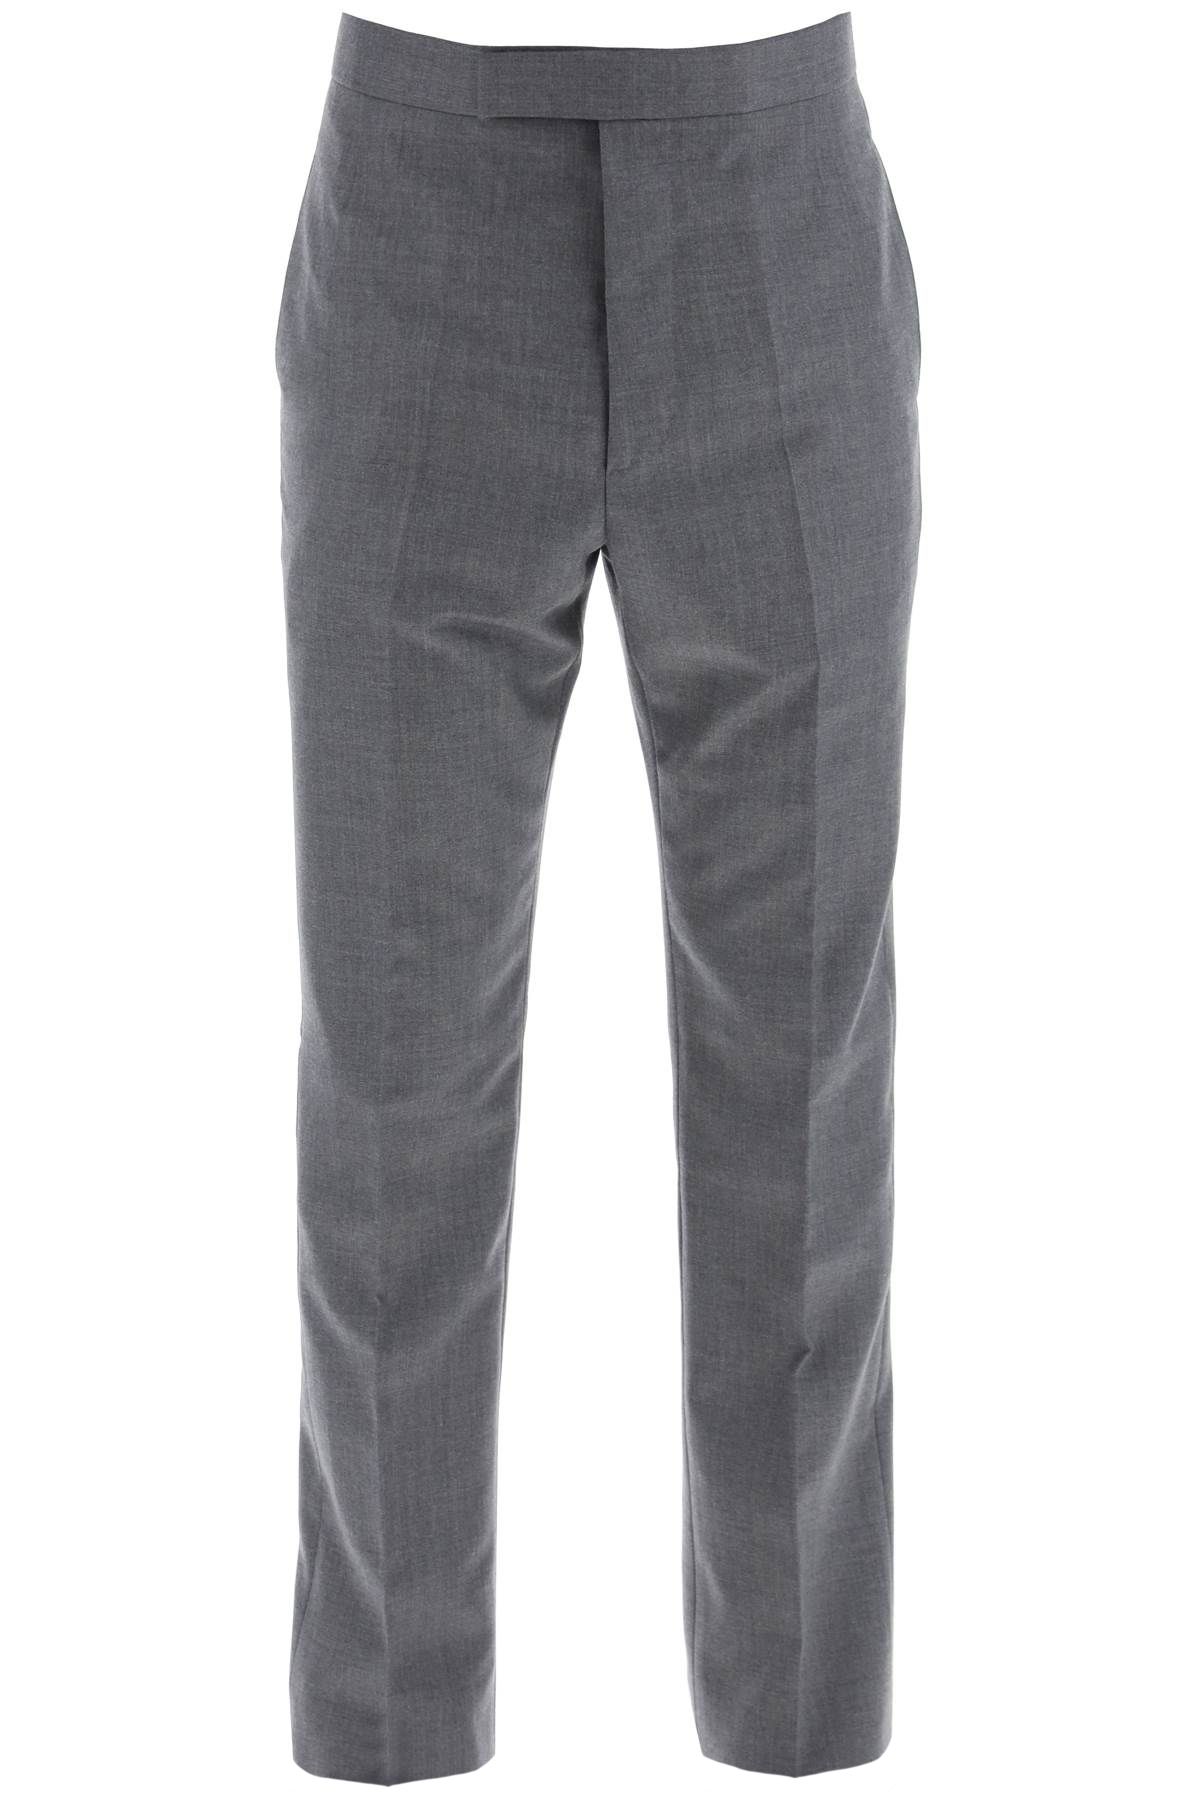 Thom Browne THOM BROWNE classic twill trousers for men